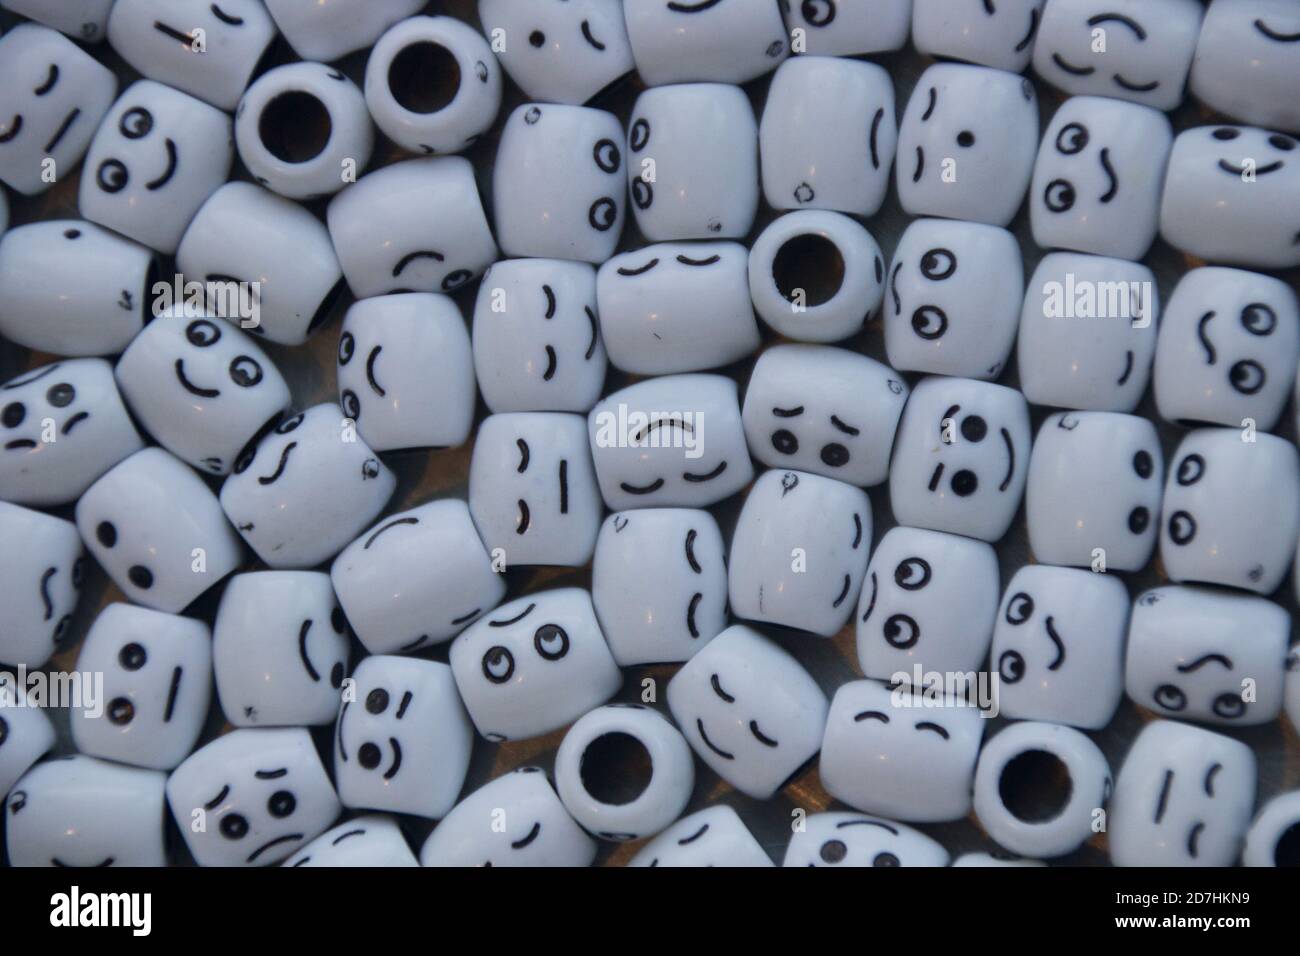 Cluster of white round shaped beads with smiles/faces. Stock Photo